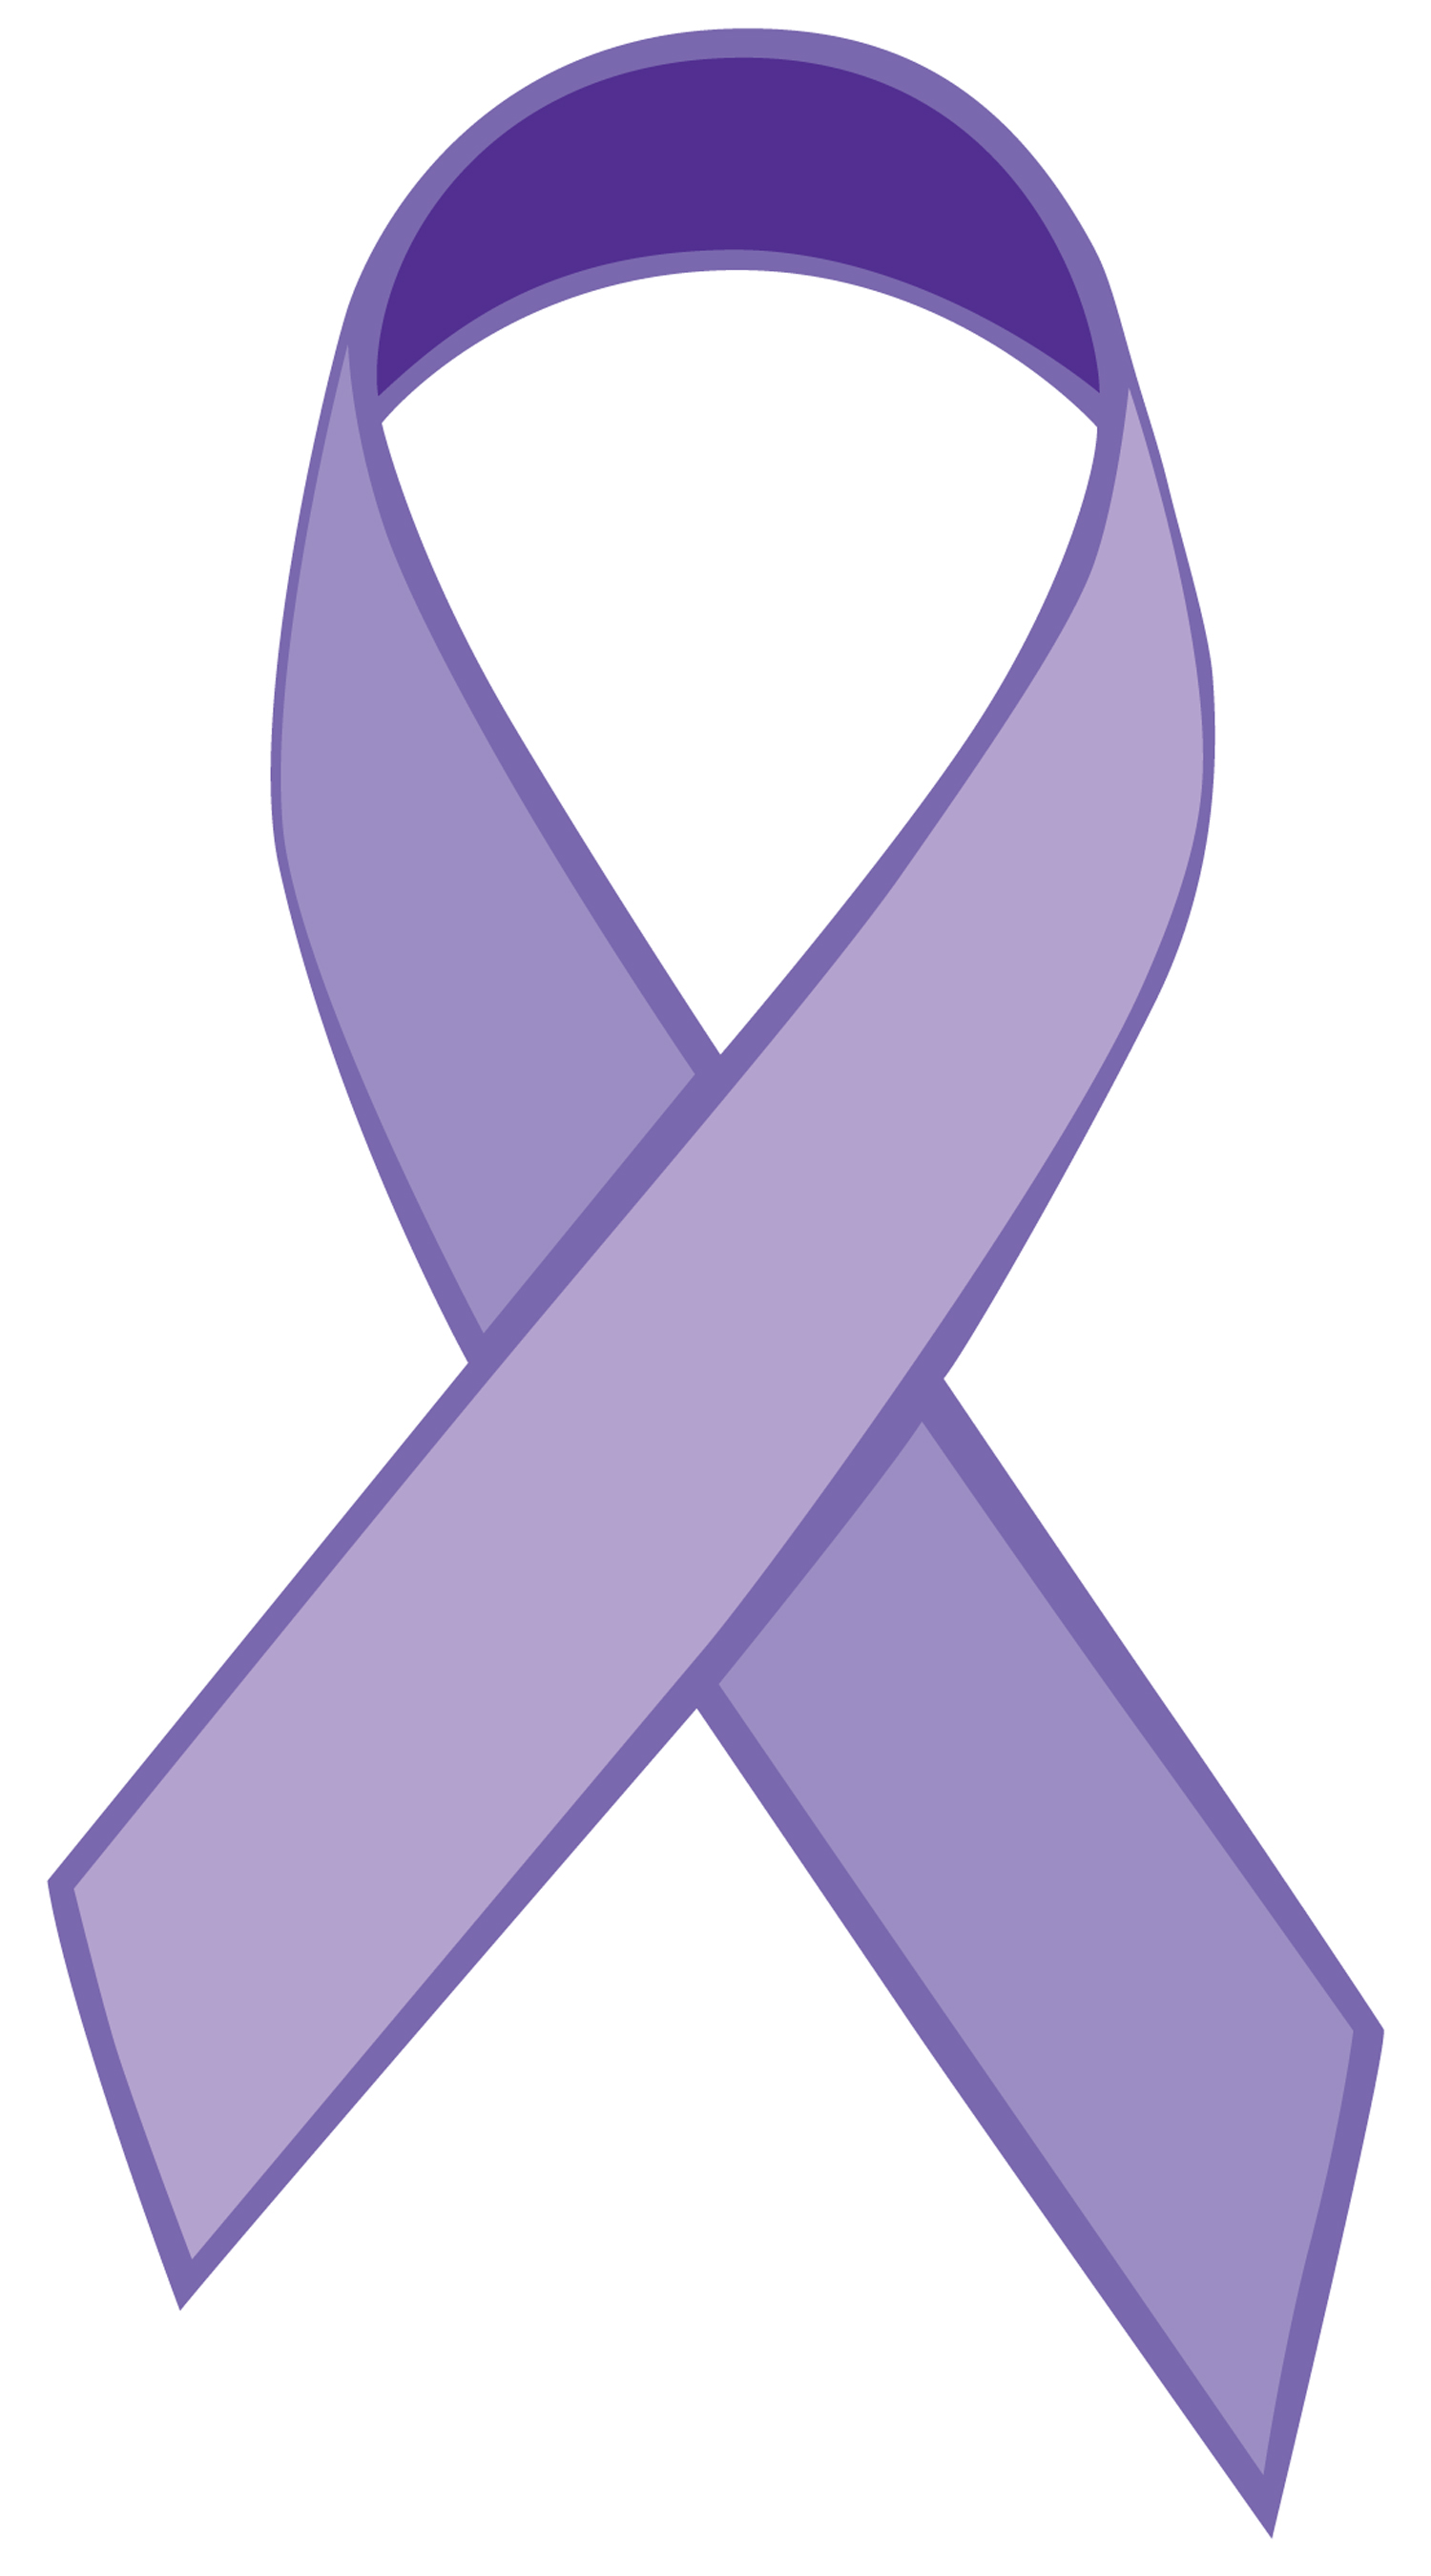 Lung Cancer Ribbon Images